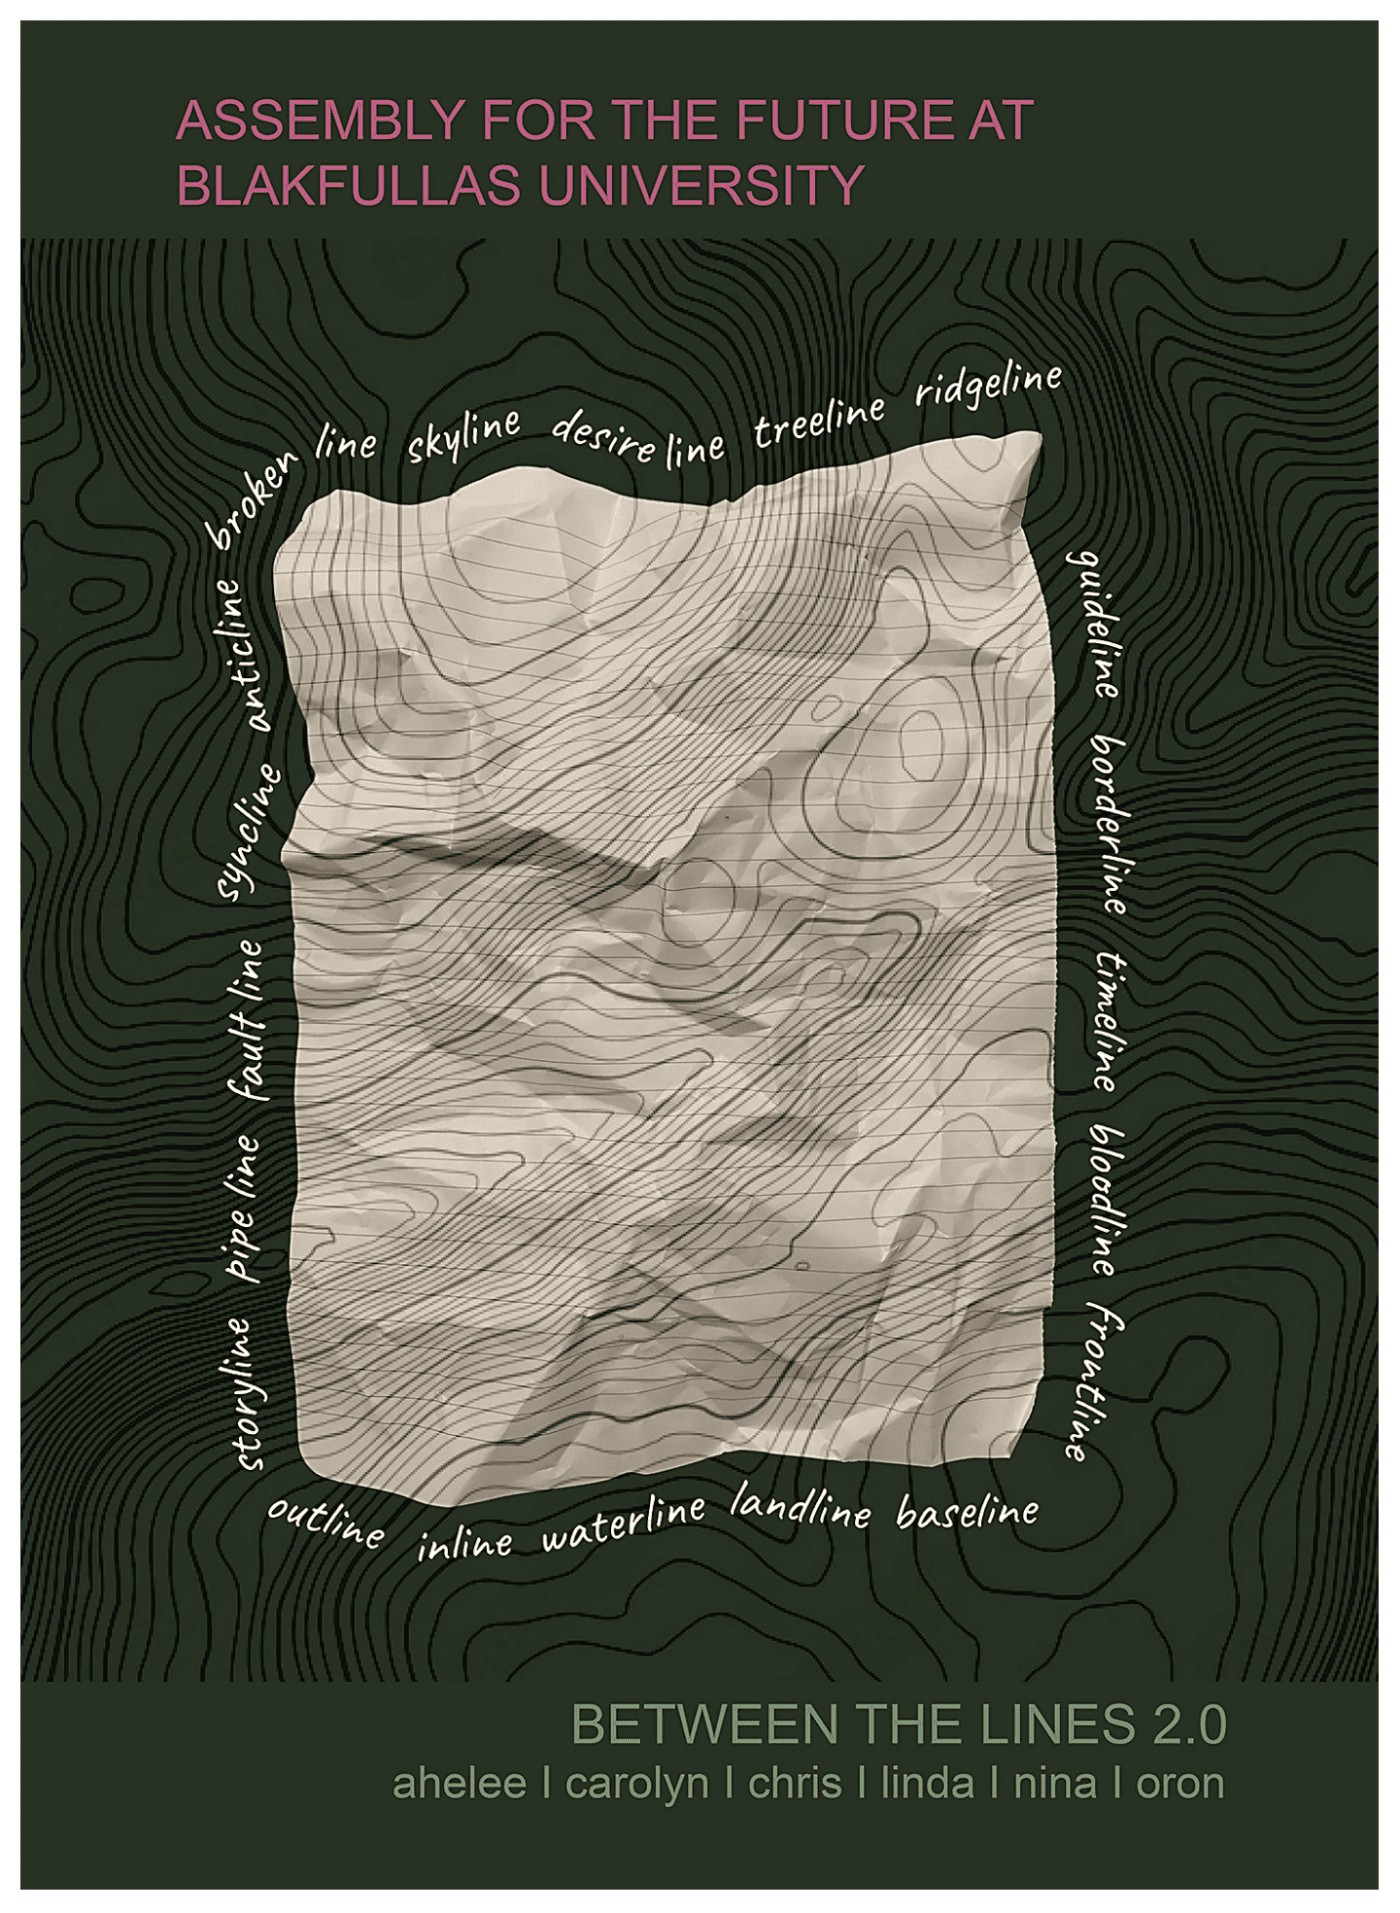 A crumpled page from a writing pad lies open, lined but without text. Contour lines from a topographic map are superimposed across it. Words create a border around the page. They read: skyline, desire line, treeline, ridgeline, guideline, borderline, timeline, bloodline, frontline, baseline, landline, waterline, inline, outline, storyline, pipe line, fault line, syncline, anticline, broken line.